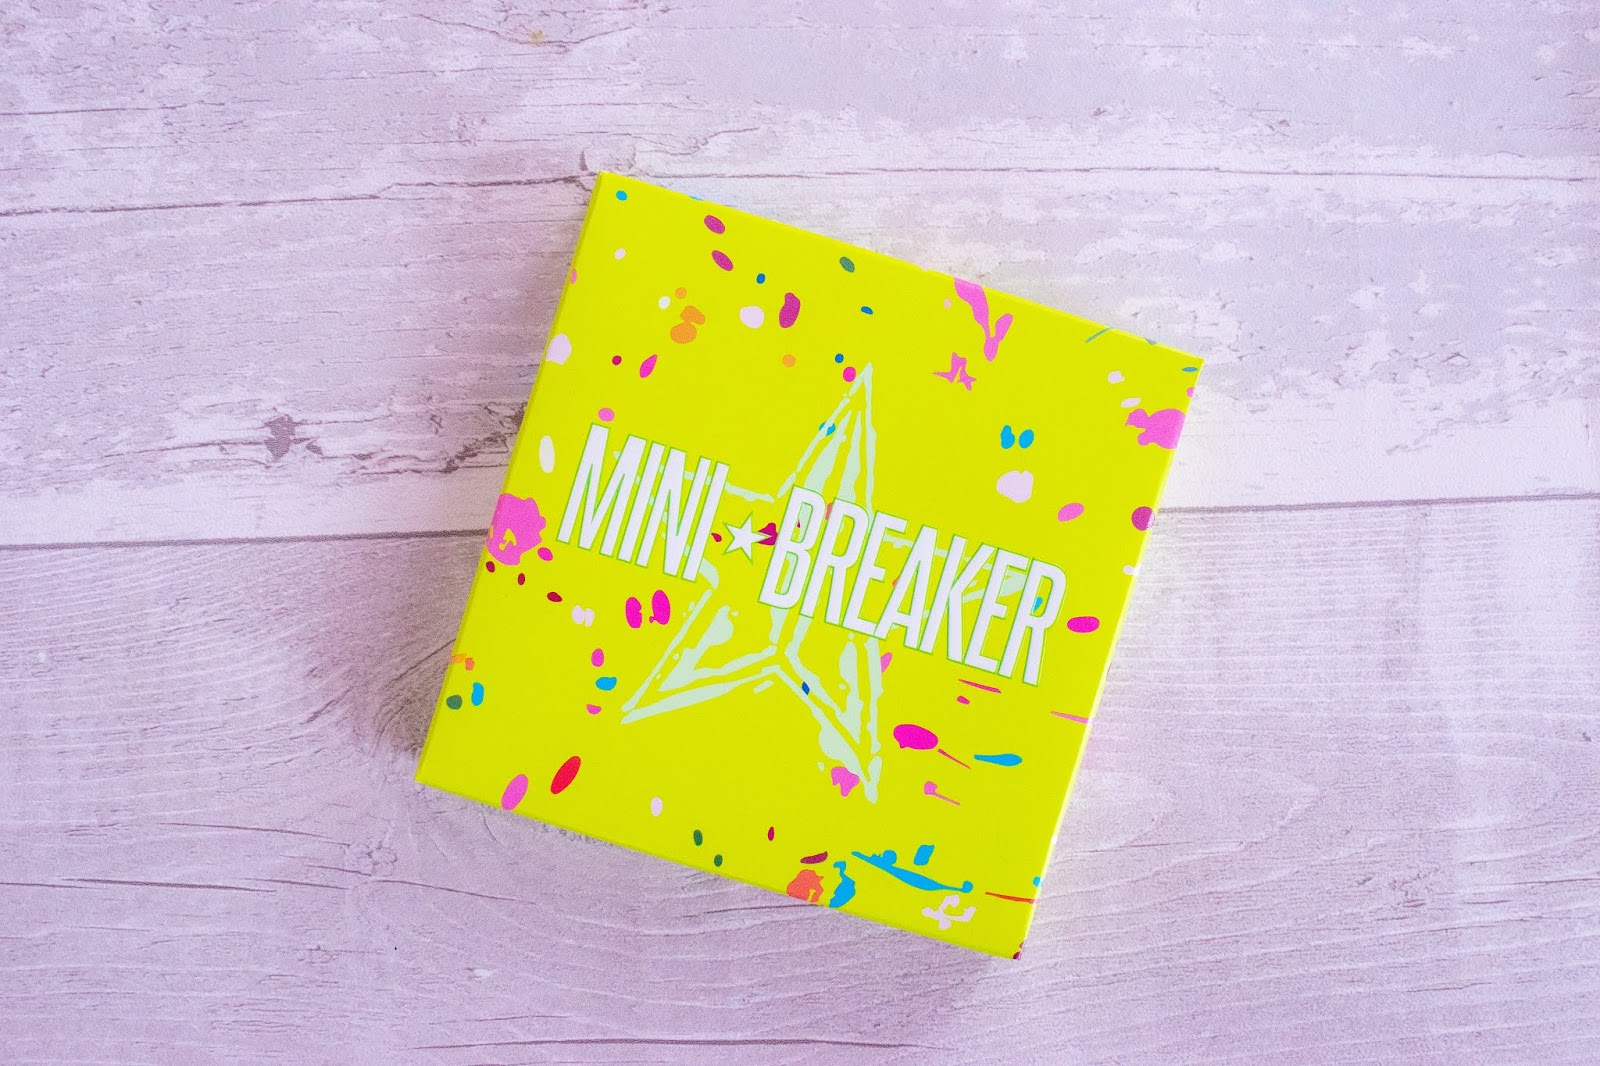 A close up of the Jeffree Star Mini Breaker Palette packaging. The box is neon green with white and pink splats over it.